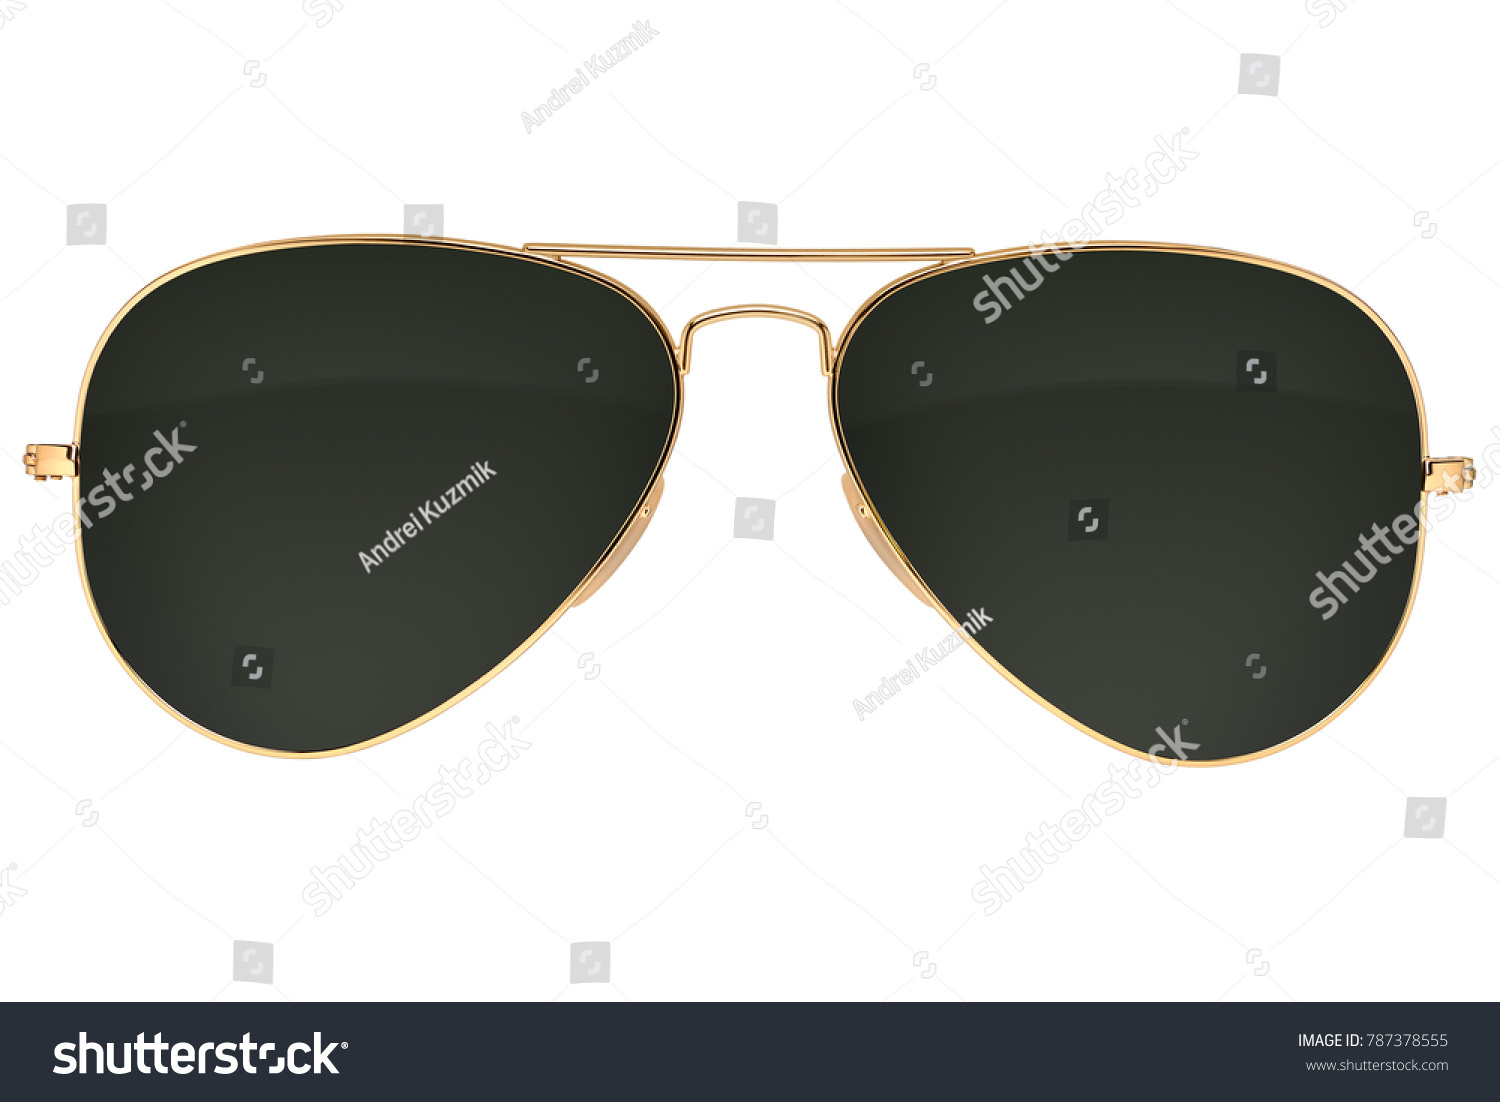 Gold frame aviator black sunglasses isolated on white background with clipping path #787378555